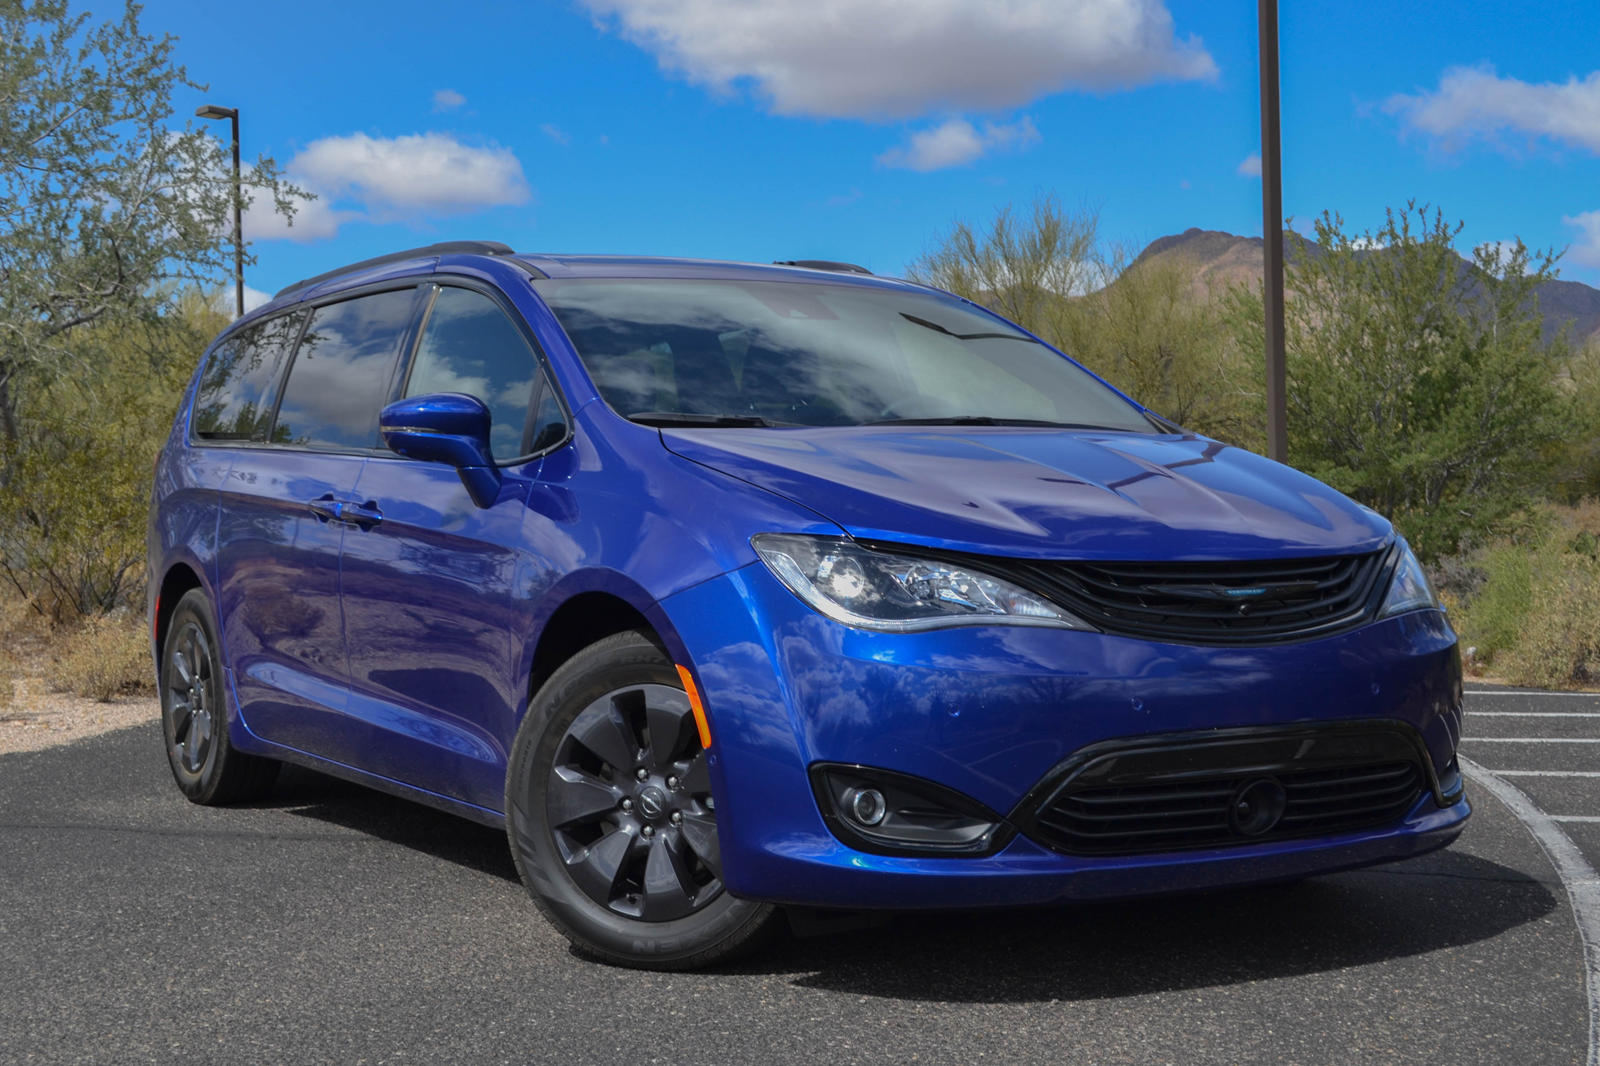 2021 Chrysler Pacifica Hybrid Review, Trims, Specs, Price